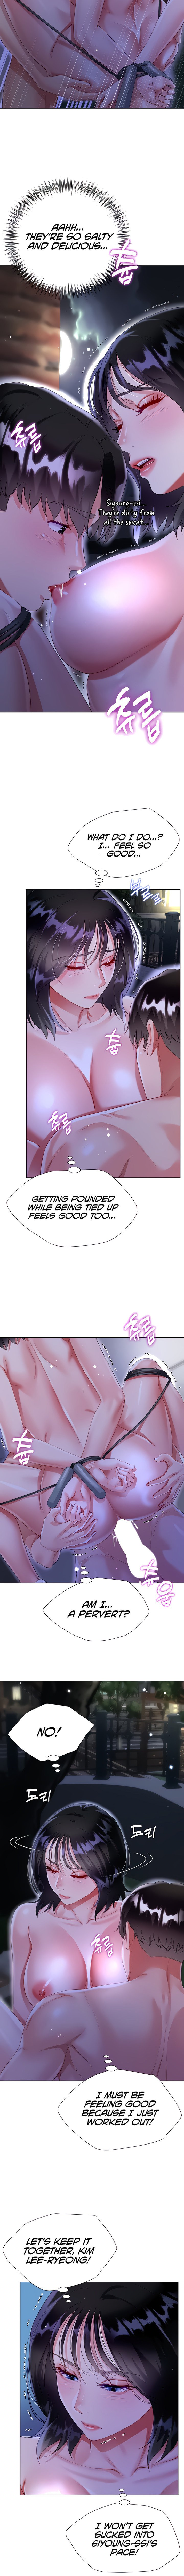 my-sister-in-laws-skirt-chap-36-3